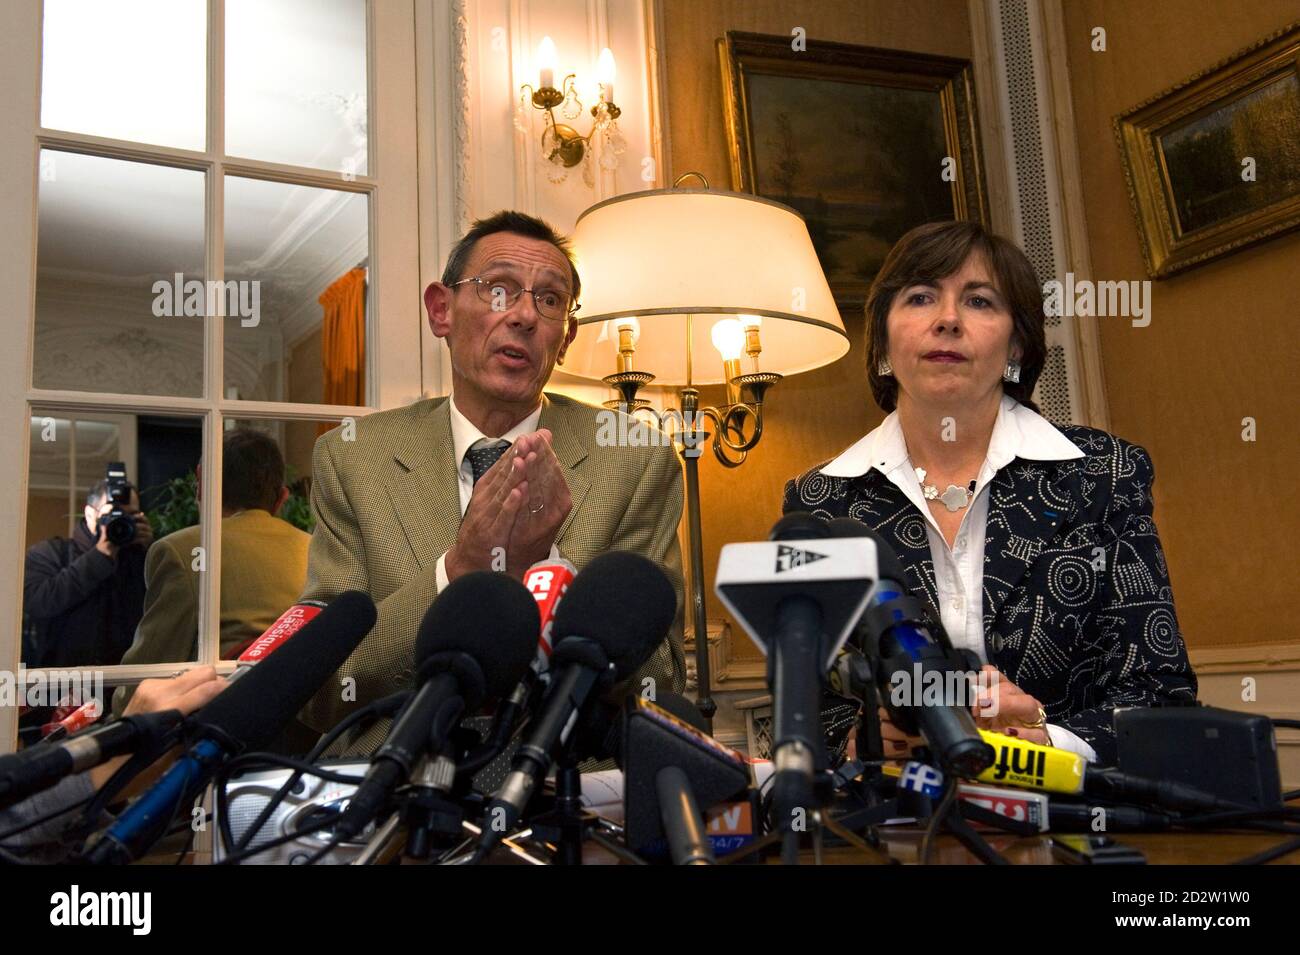 Marie-Christine Chastant-Morand (R) and Thierry Moser, lawyers of Christine and Jean-Marie Villemin, parents of murdered 4-year-old Gregory, hold a news conference in Paris October 22, 2009 about the DNA traces from a man and a woman which were found on a threatening anonymous letter in 'the Gregory Affair'. French detectives have found DNA traces from the child murder case of Gregory Villemin, a 4-year-old boy, who was found dead with his feet and hands bound in a river near his home in eastern France.    REUTERS/Philippe Wojazer  (FRANCE CRIME LAW) Stock Photo